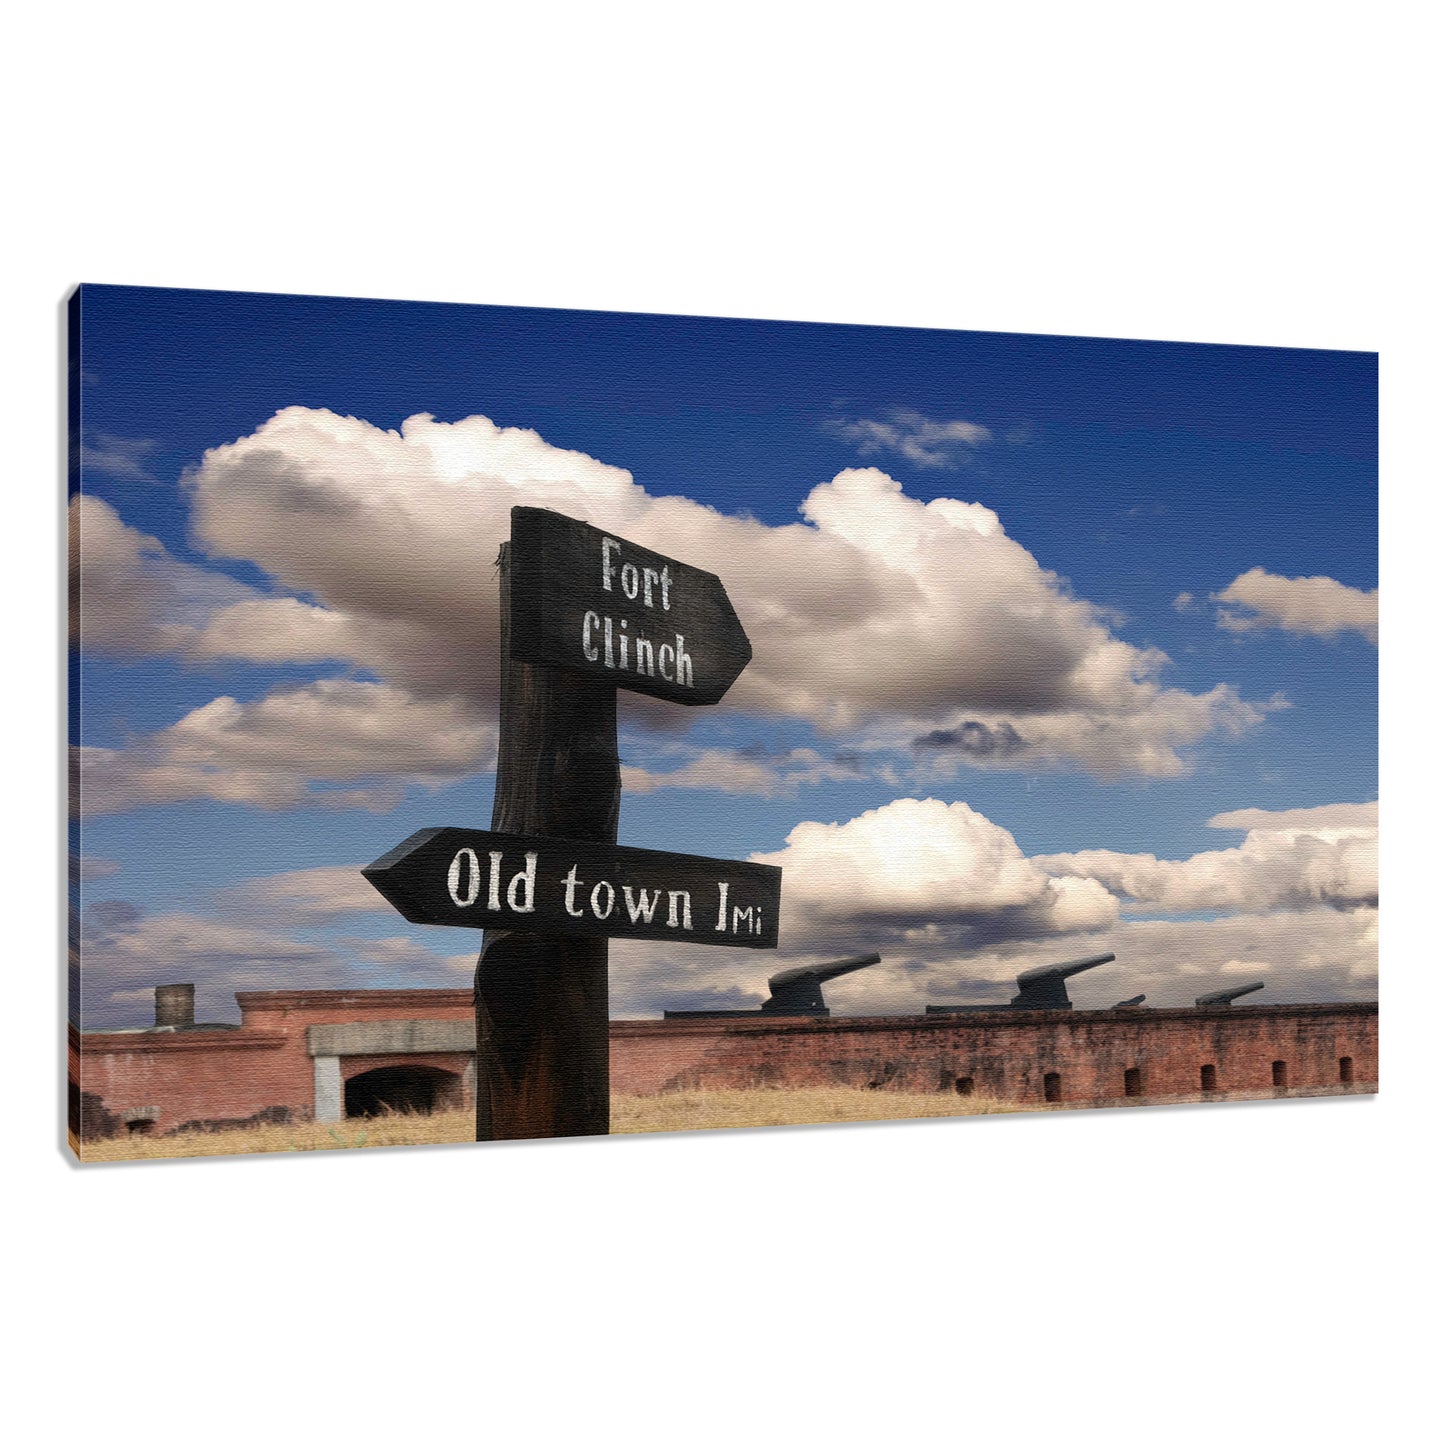 Oversized Industrial Wall Art: Path Sign and Fort Clinch Urban Landscape Photo Fine Art Canvas Wall Art Prints